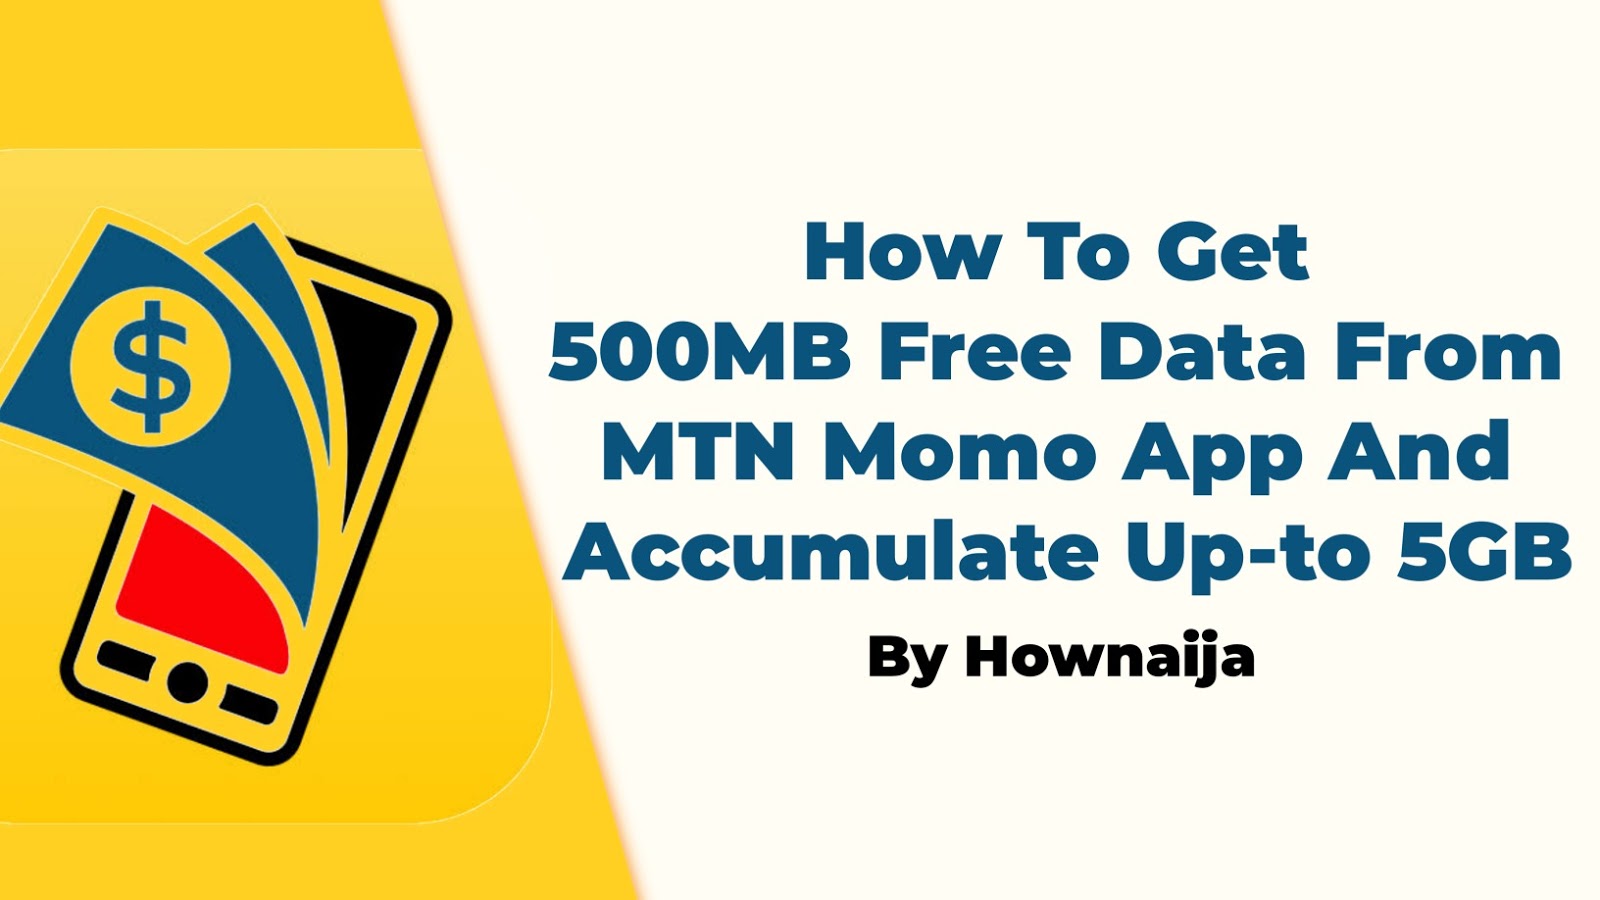 How To Get 500MB Free Data From MTN Momo App And Accumulate Up-to 5GB